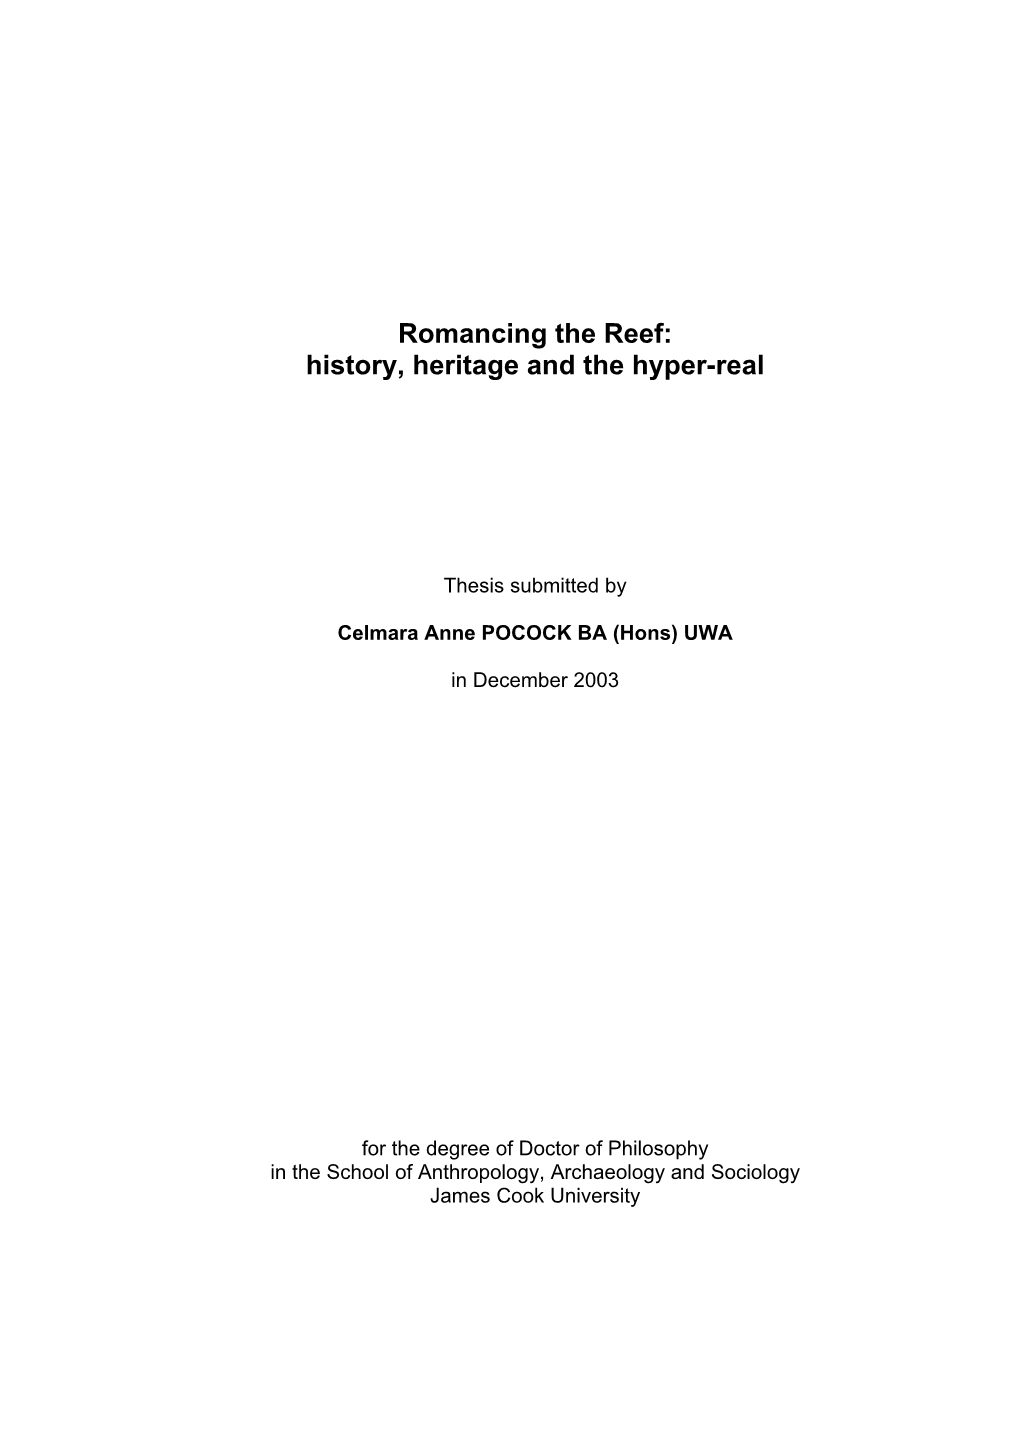 Romancing the Reef: History, Heritage and the Hyper-Real